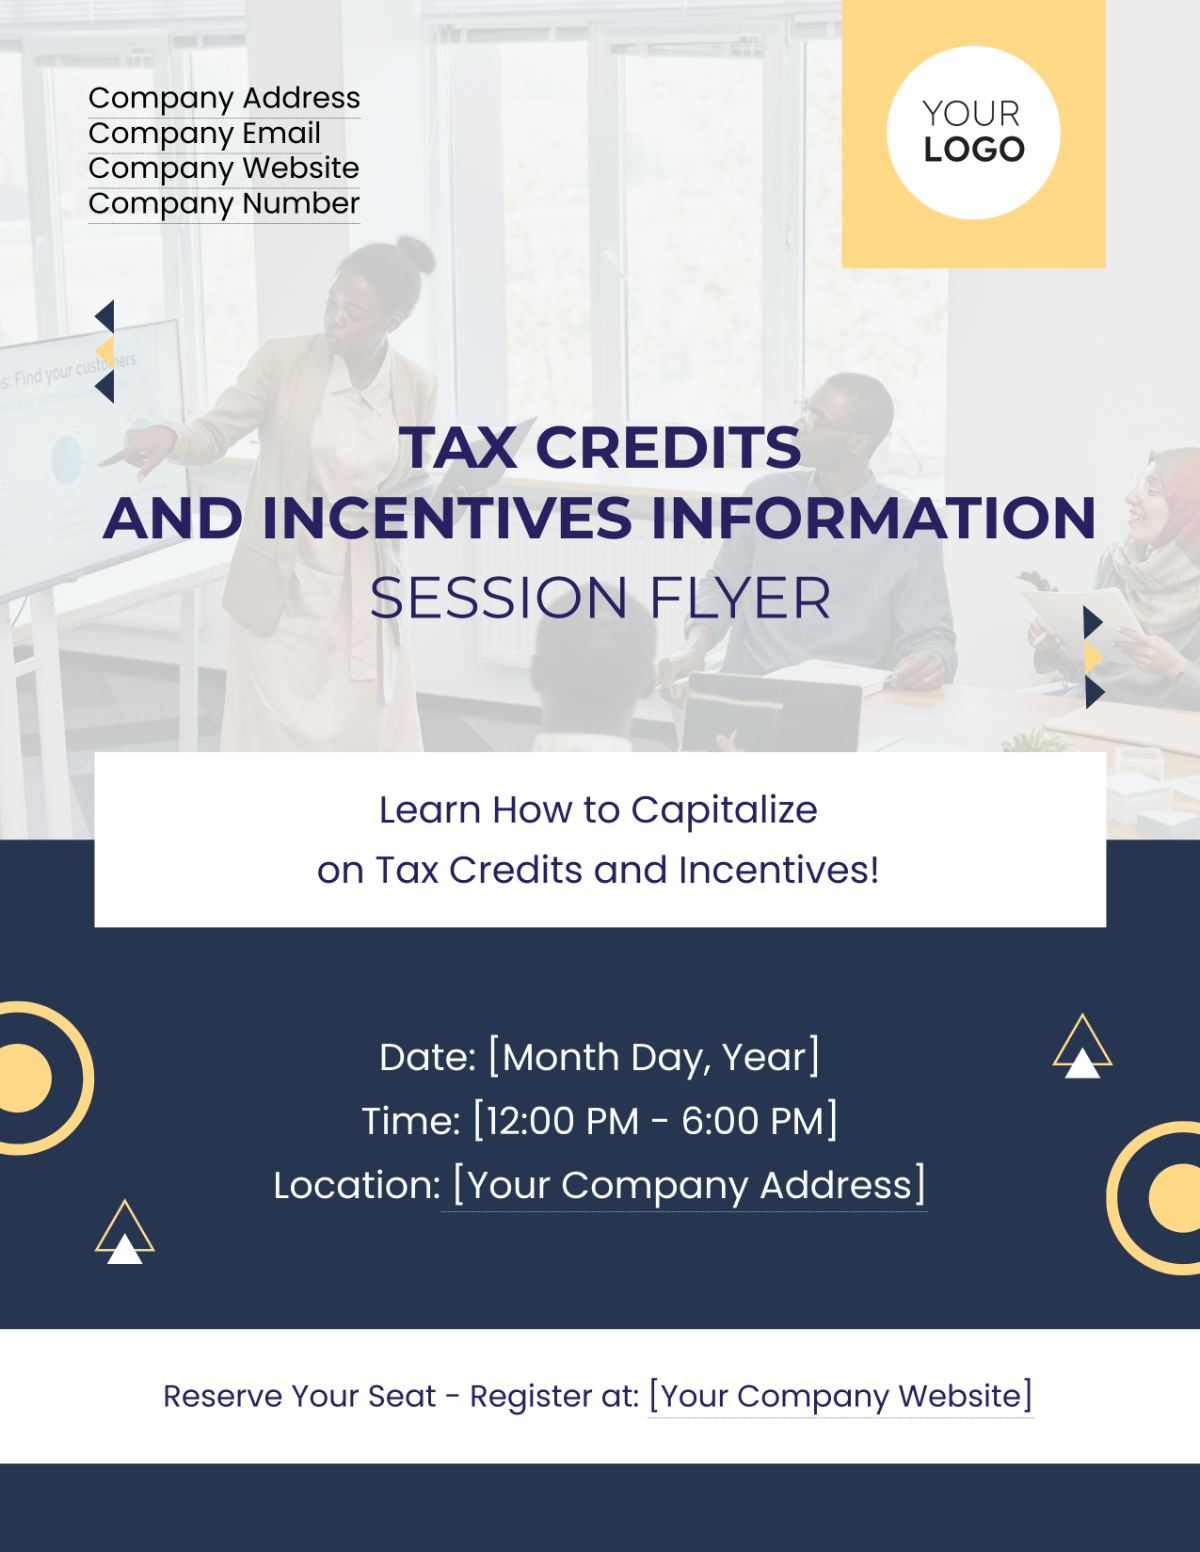 Free Tax Credits and Incentives Information Session Flyer Template